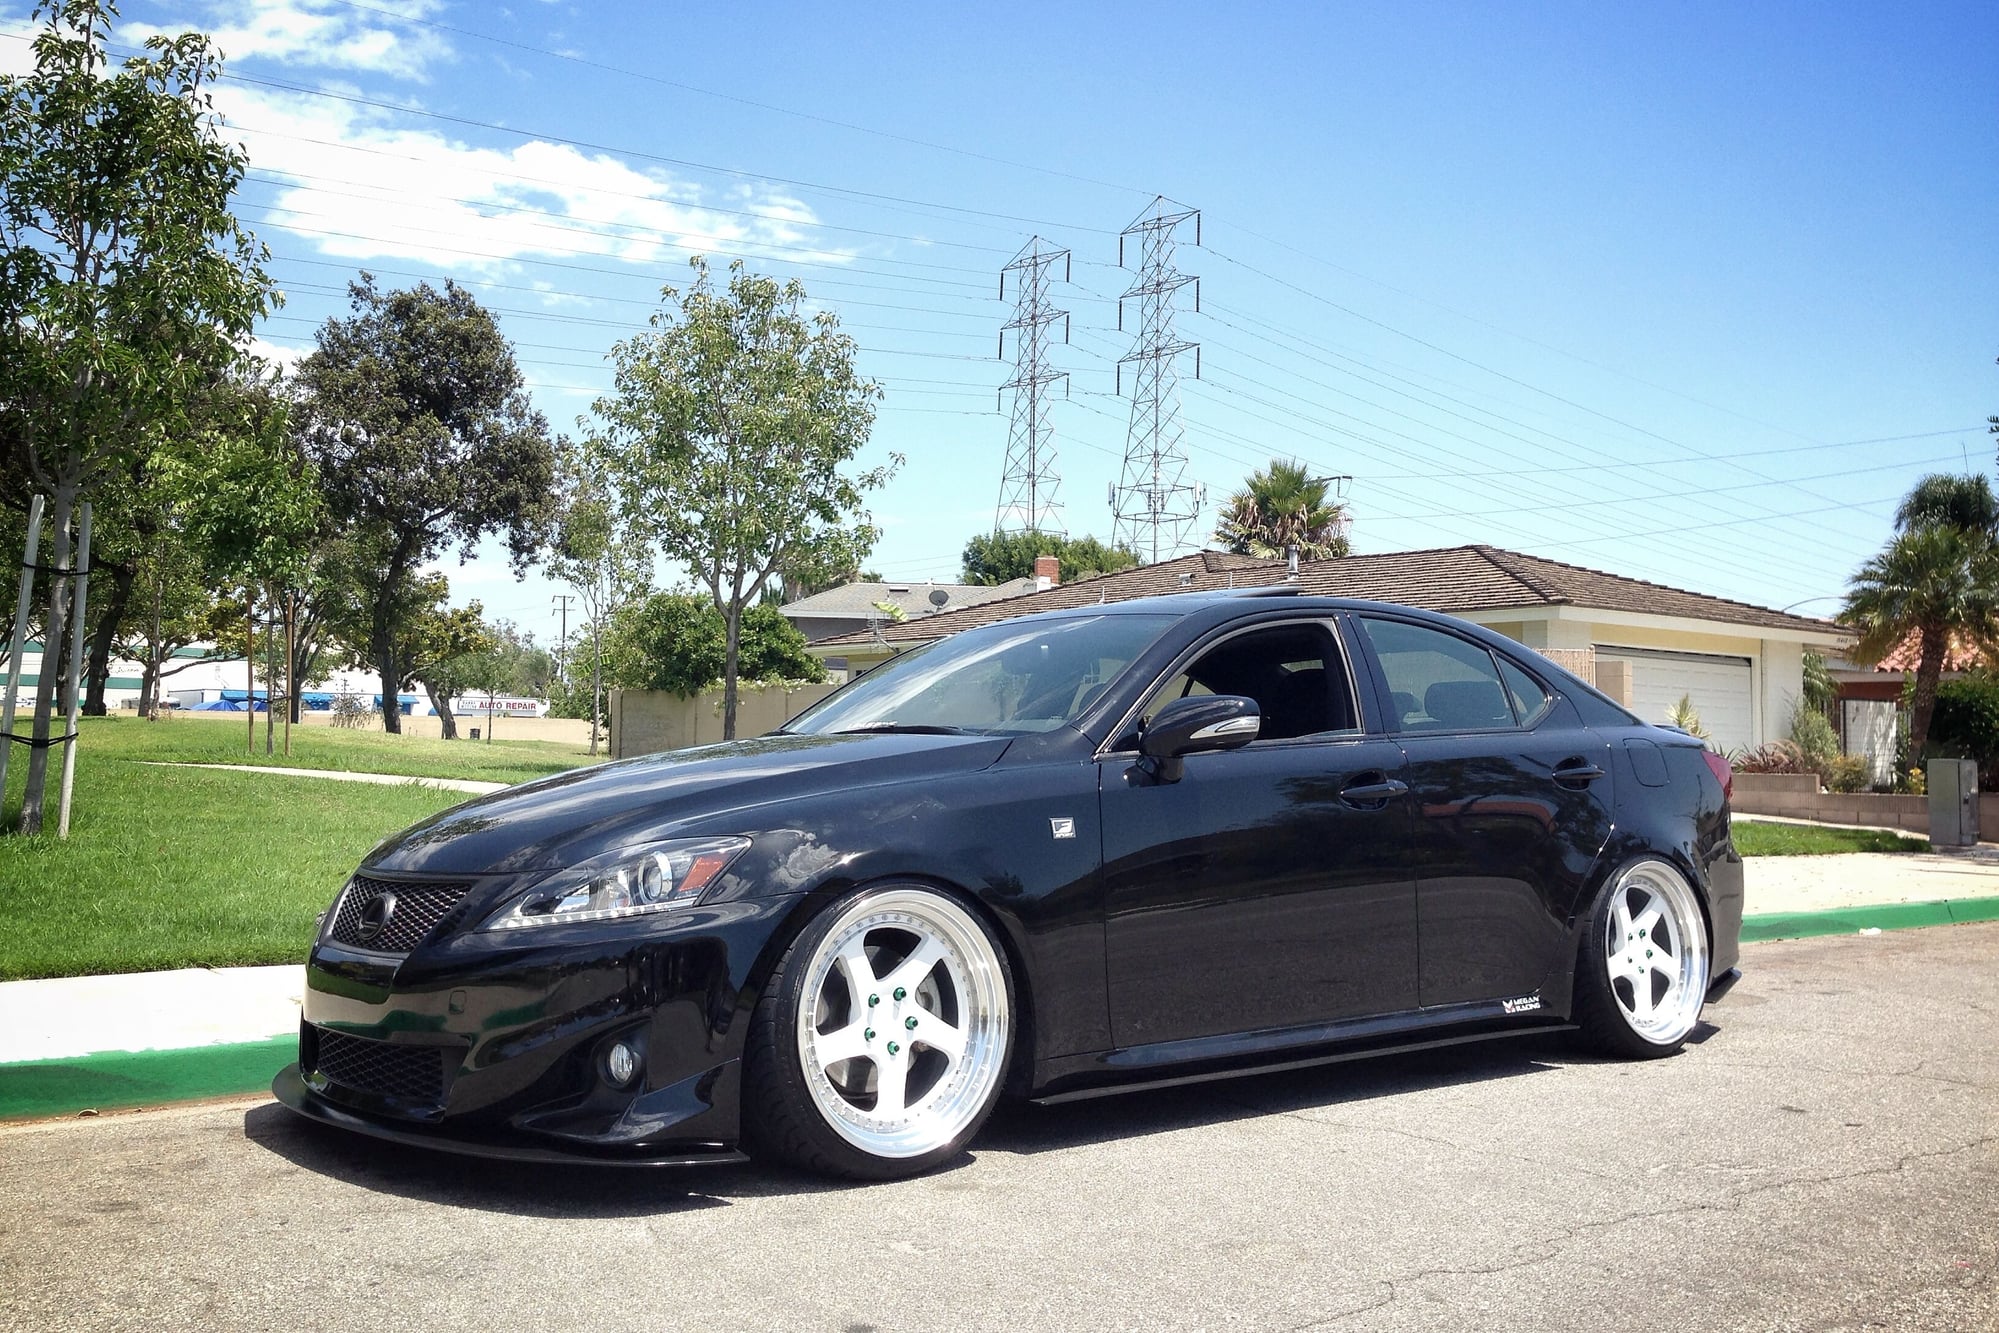 Steering/Suspension - FS: Megan Racing LP Coilovers - Used - 2006 to 2012 Lexus IS250 - Huntington Beach, CA 92648, United States